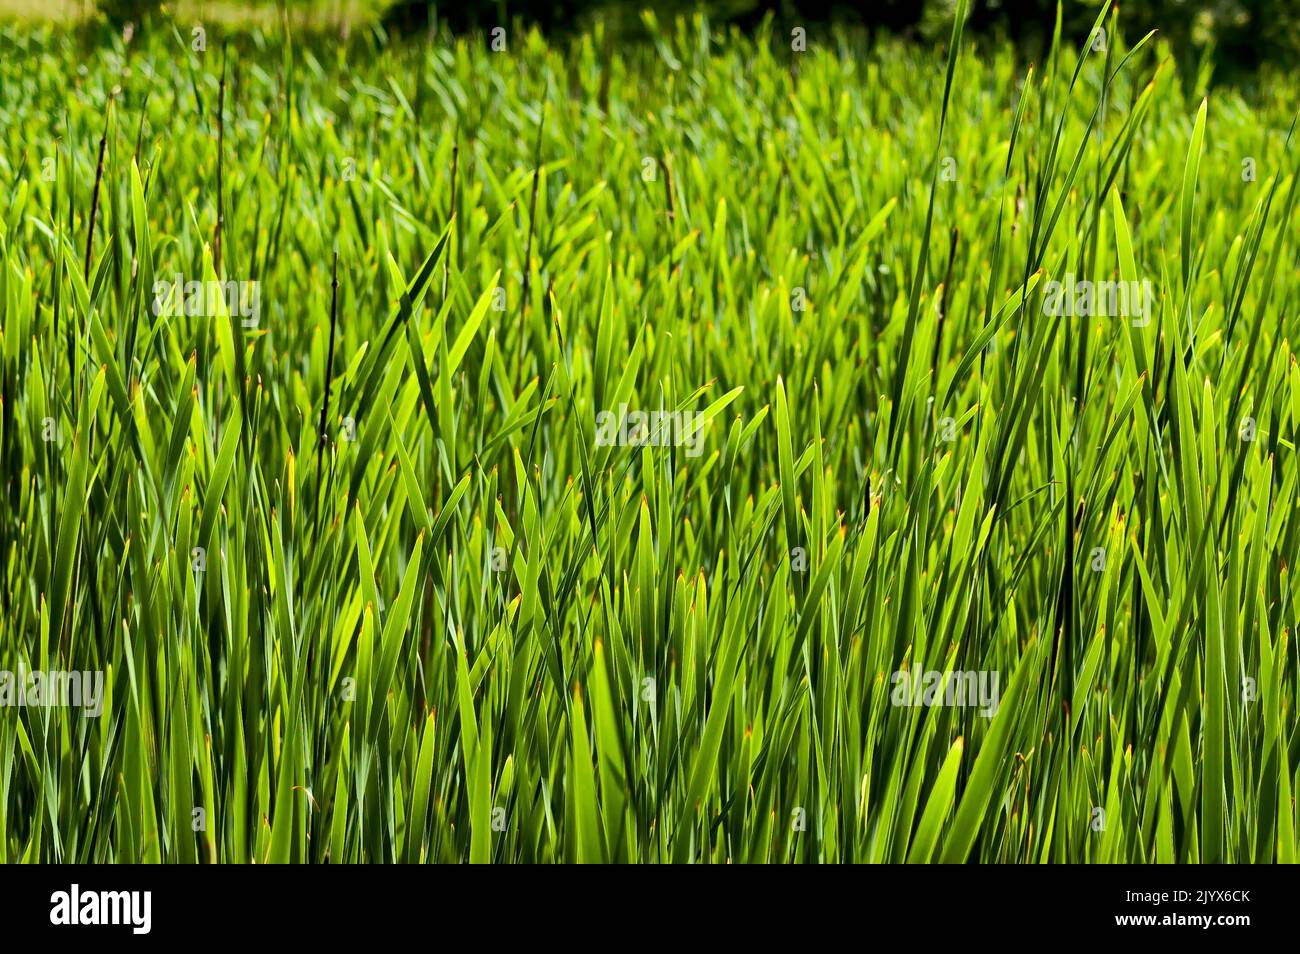 View of a natural green field of wild grass, Sofia, Bulgaria Stock Photo